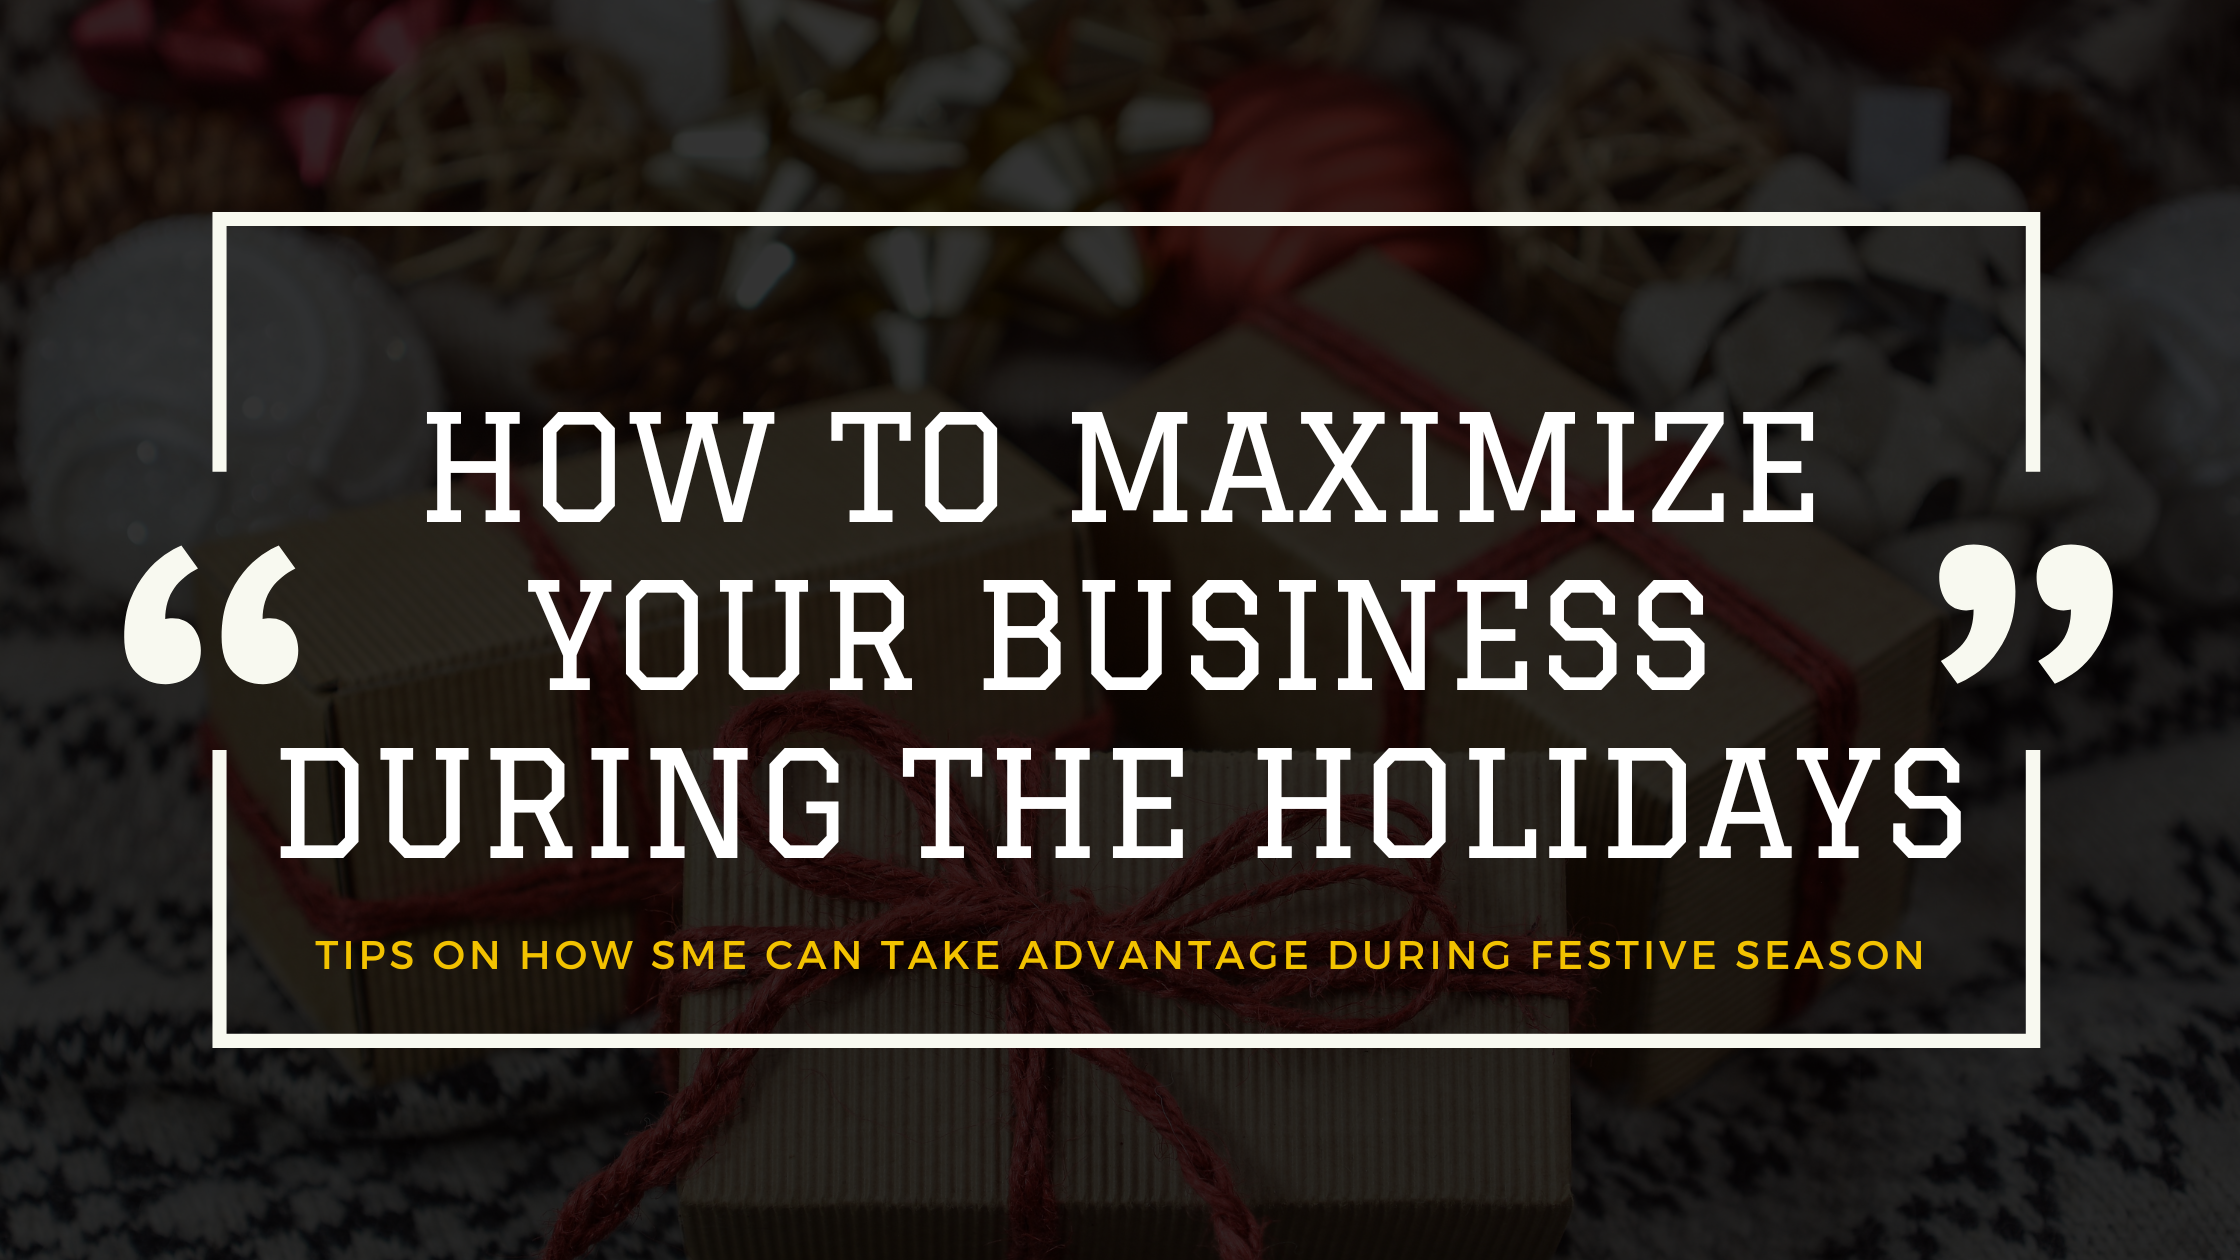 How to Maximize Your Business During The Holidays